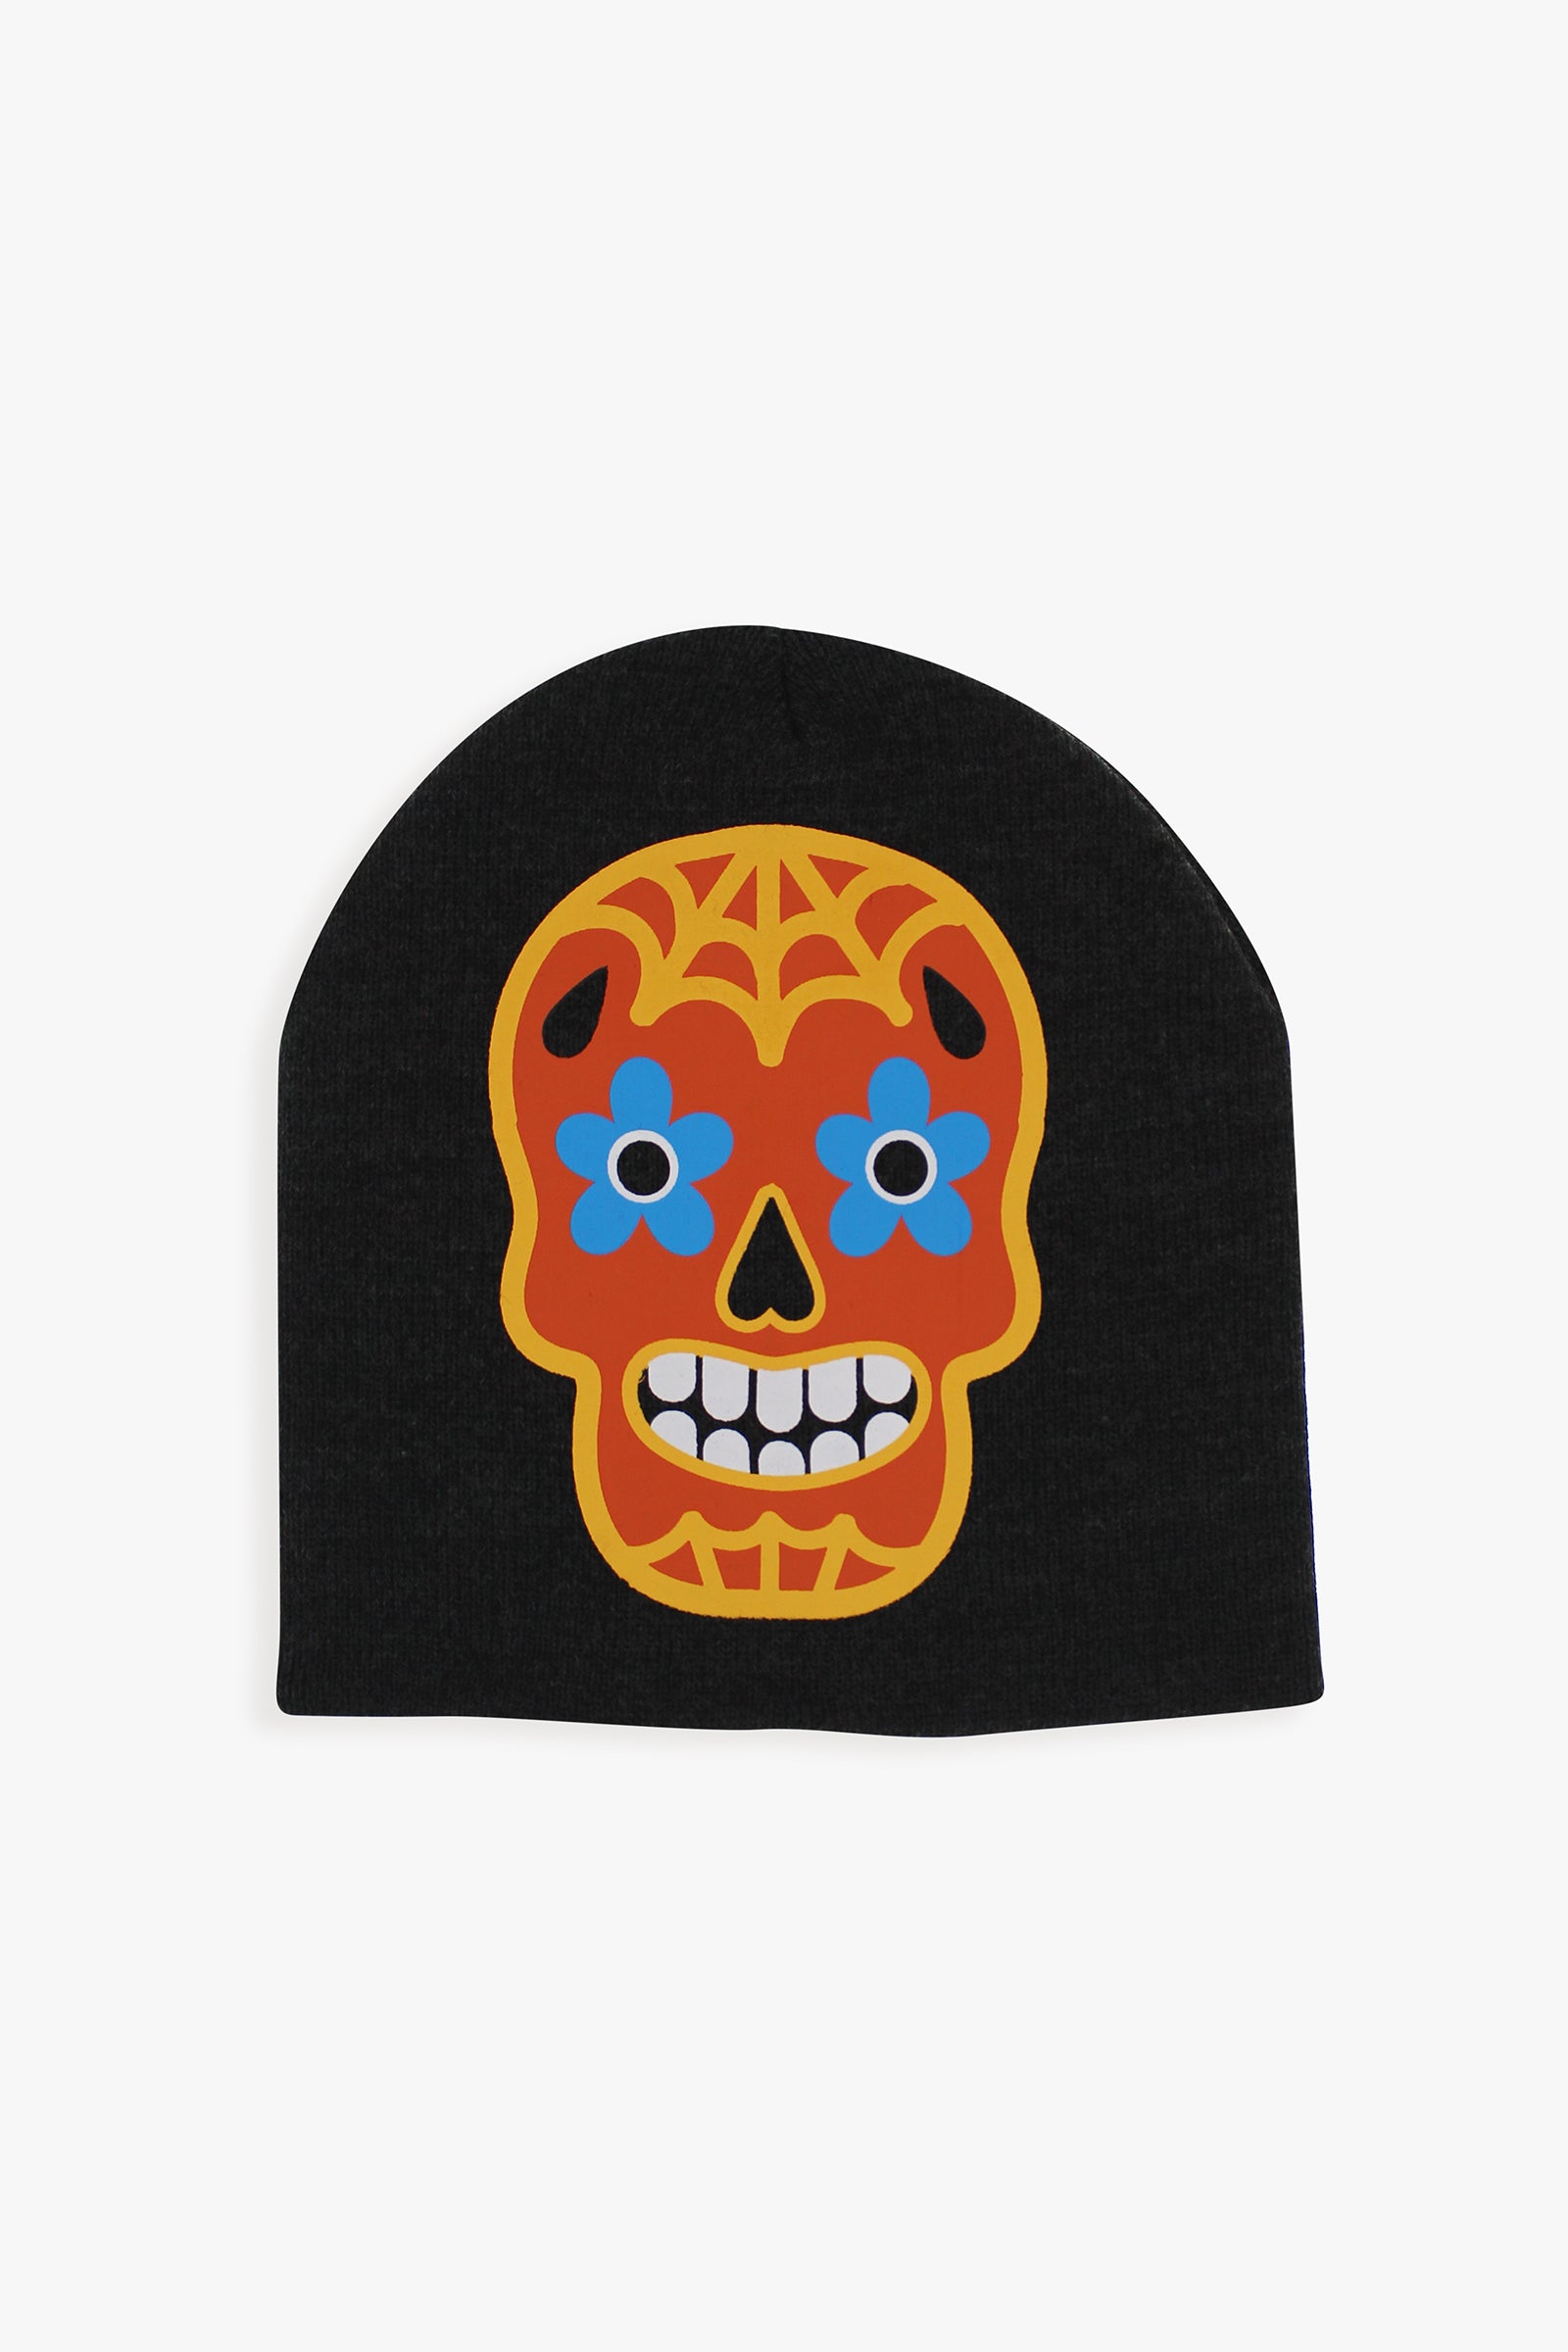 Day of The Dead and Halloween Unisex Adult Beanie